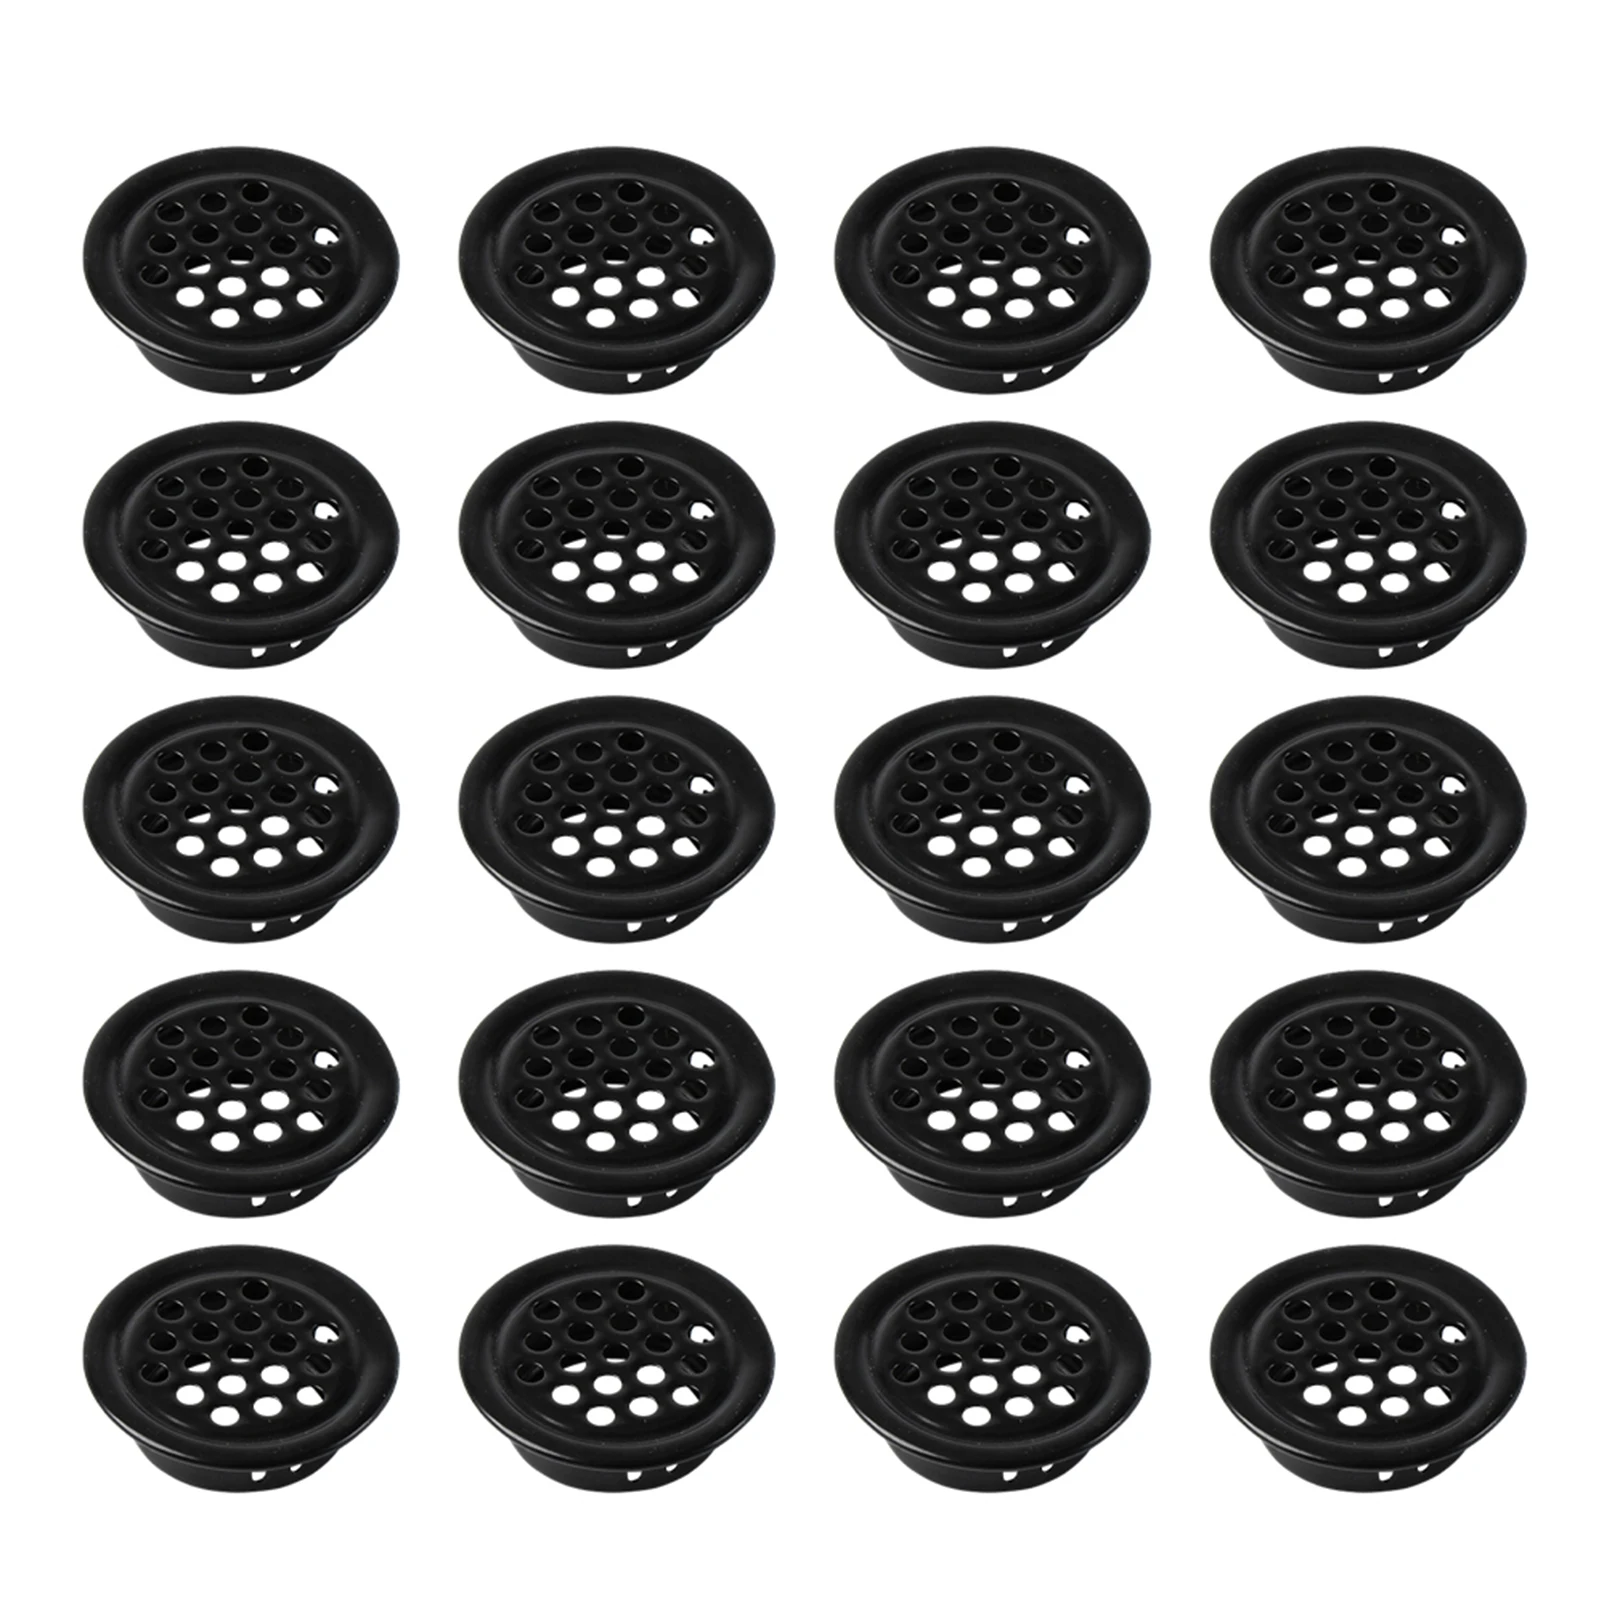 

20pcs/pack Home Wardrobe Louver Stainless Steel Closet Mesh Hole Kitchen For Bathroom Round Vent Grille Circular Ventilation